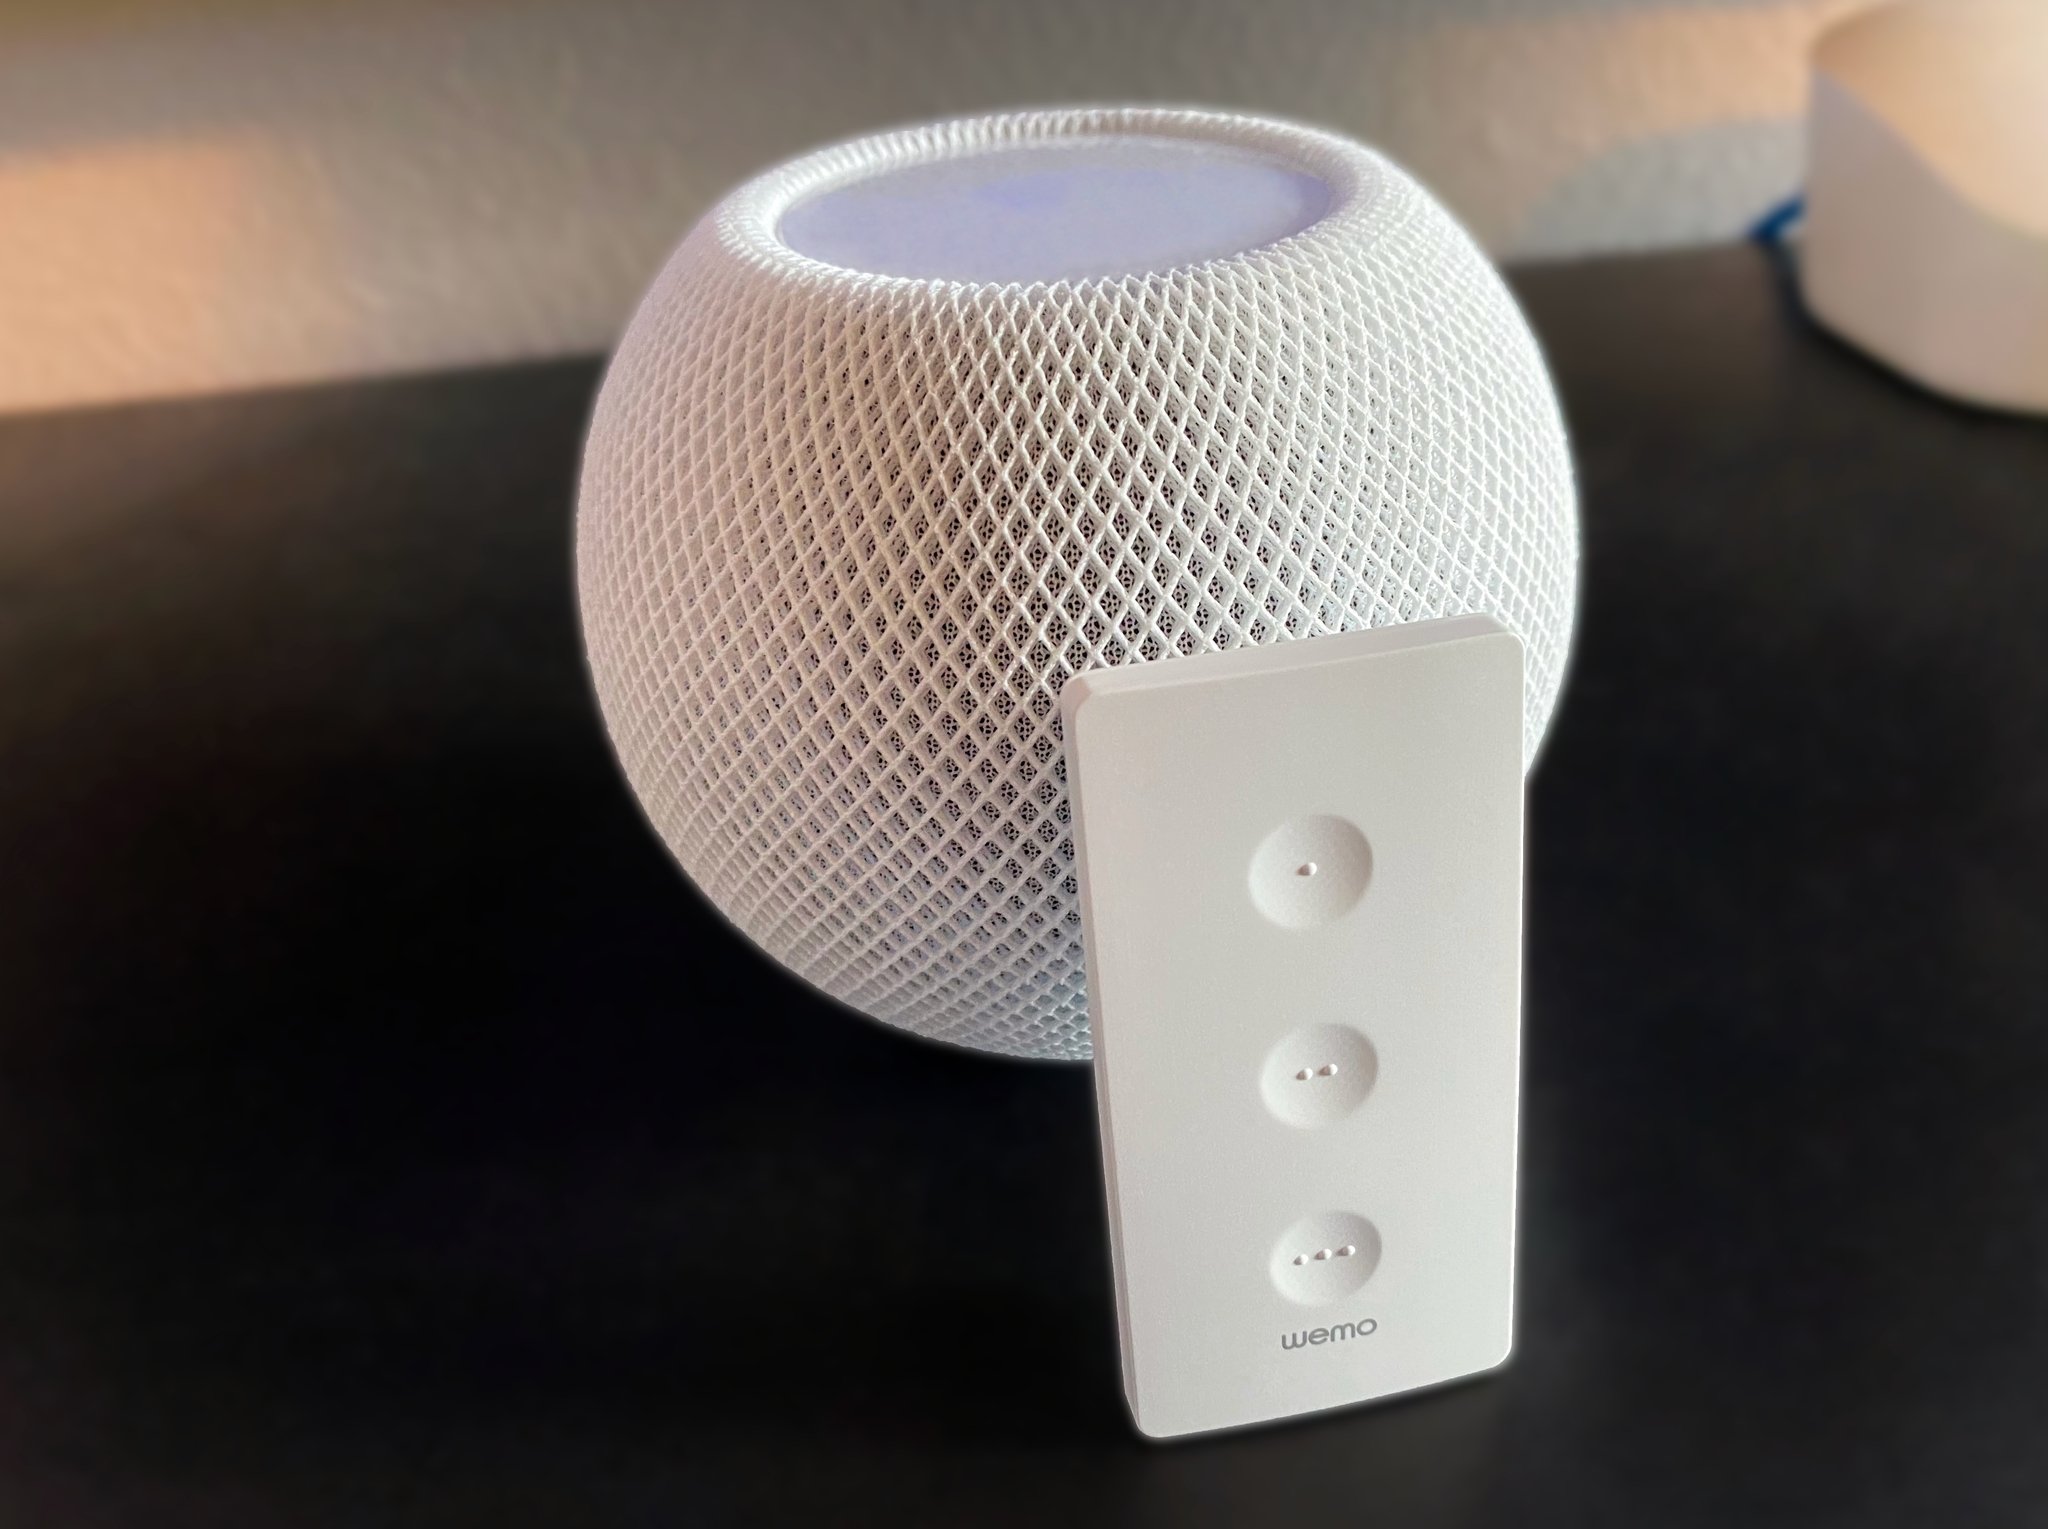 Wemo Stage Scene Controller against a Homepod